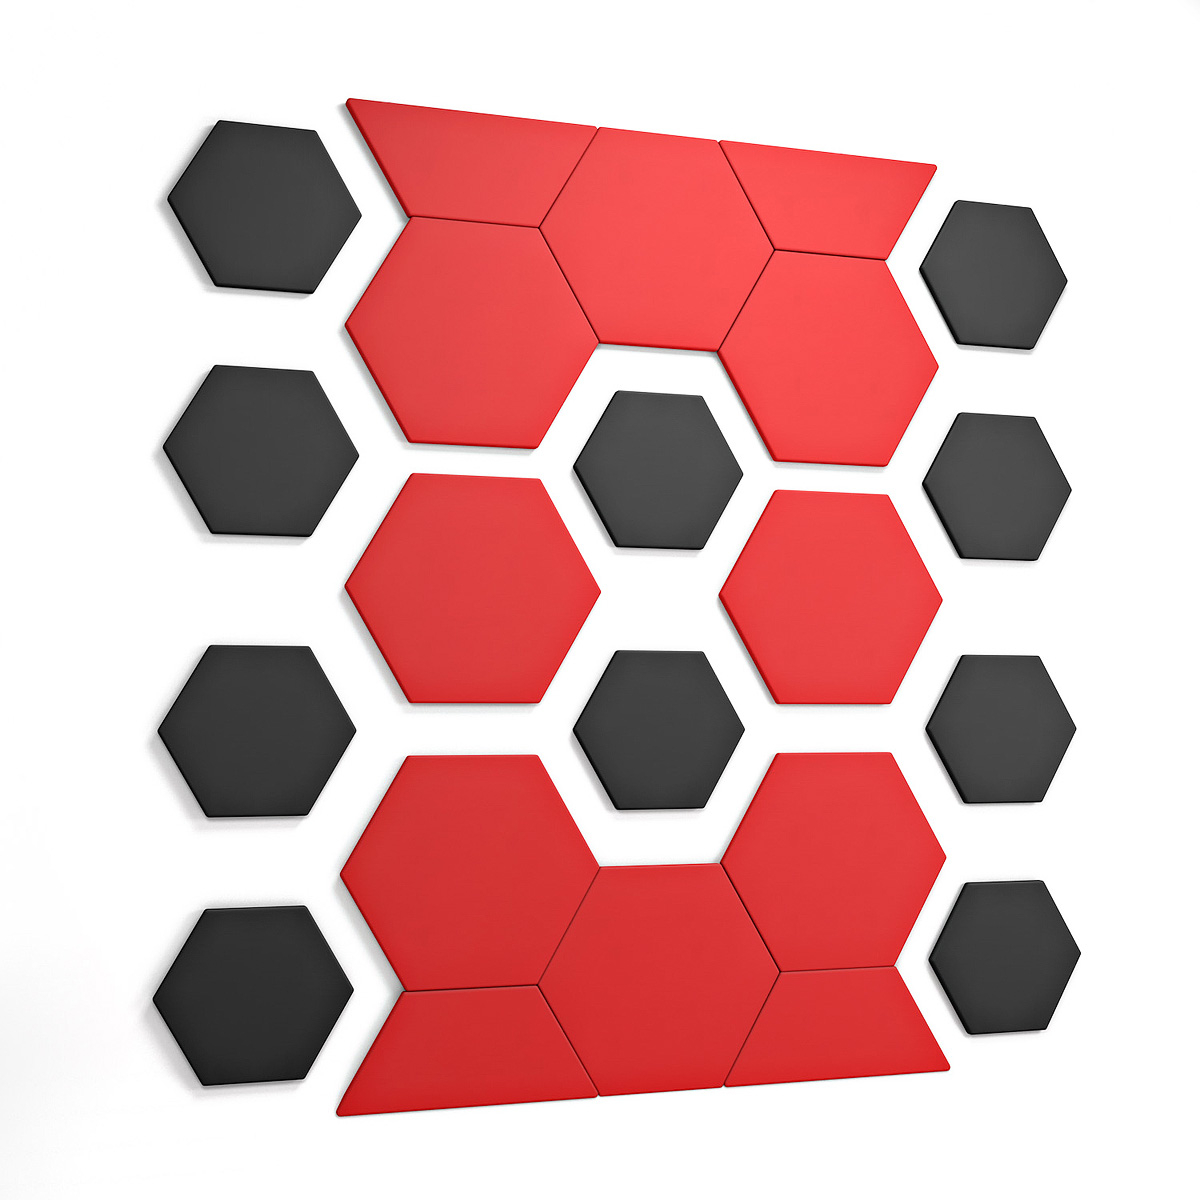 ZAGATO™ Hexagonal Panelling Are Great For Creating A Soundproofing Wall for Working Offices